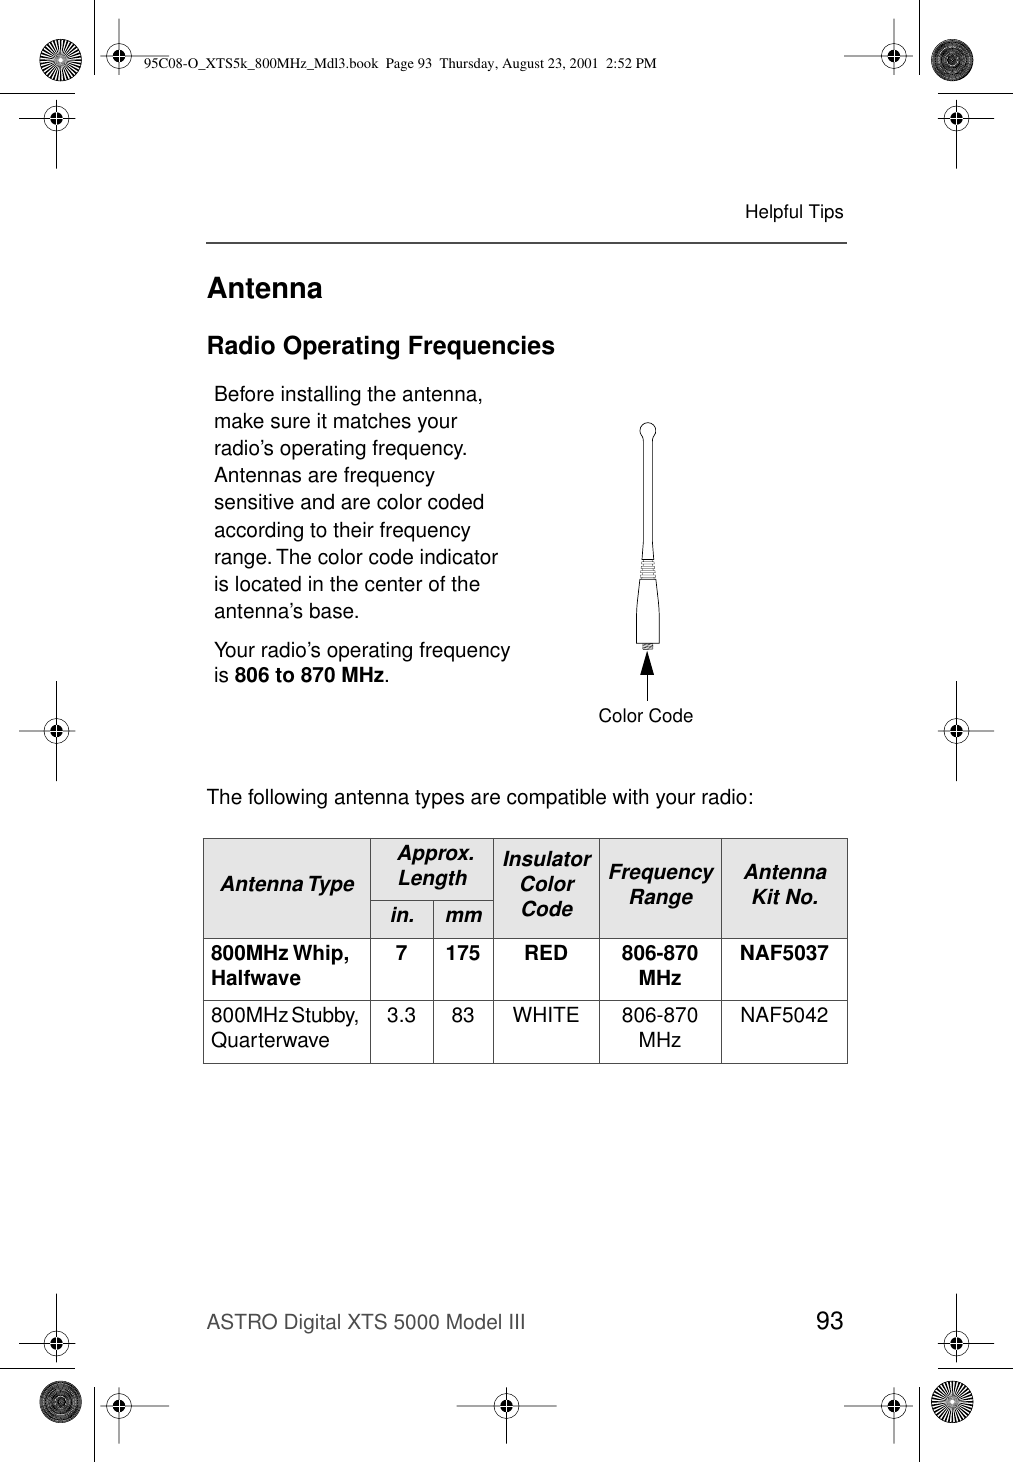 ASTRO Digital XTS 5000 Model III 93Helpful TipsAntennaRadio Operating FrequenciesThe following antenna types are compatible with your radio:Before installing the antenna, make sure it matches your radio’s operating frequency. Antennas are frequency sensitive and are color coded according to their frequency range. The color code indicator is located in the center of the antenna’s base.Your radio’s operating frequency is 806 to 870 MHz.Antenna Type Approx. Length Insulator ColorCodeFrequency Range Antenna Kit No.in. mm800MHz Whip,Halfwave 7 175 RED 806-870 MHz NAF5037800MHz Stubby, Quarterwave 3.3 83 WHITE 806-870 MHz NAF5042MAEPF-23262-OUHFHelicalUHF800 MHzWhip800 MHzStubbyColor Code95C08-O_XTS5k_800MHz_Mdl3.book  Page 93  Thursday, August 23, 2001  2:52 PM